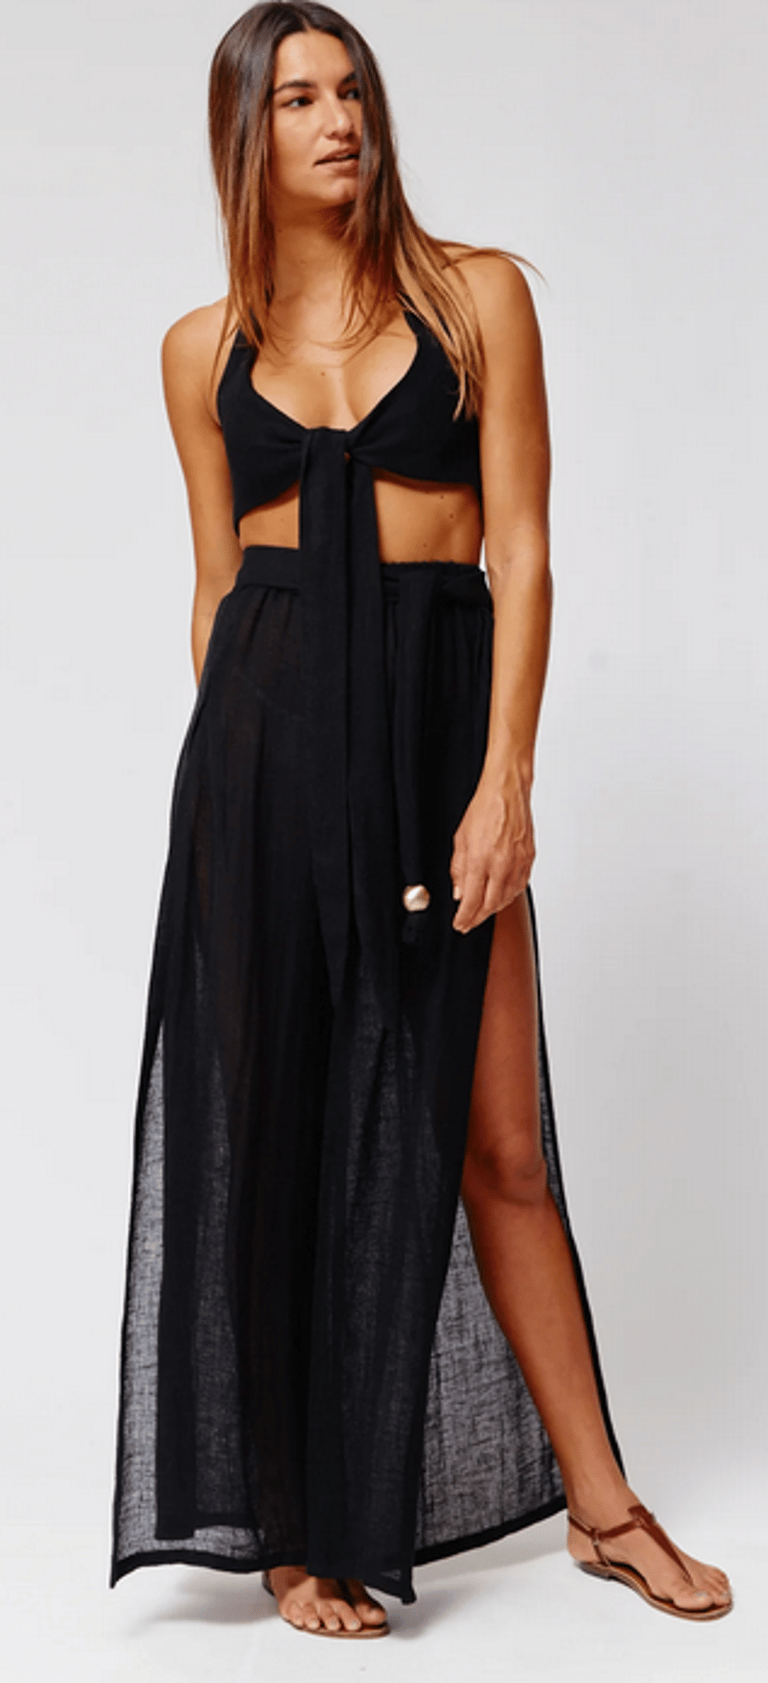 Wide Leg Pant With Open Sides - Black